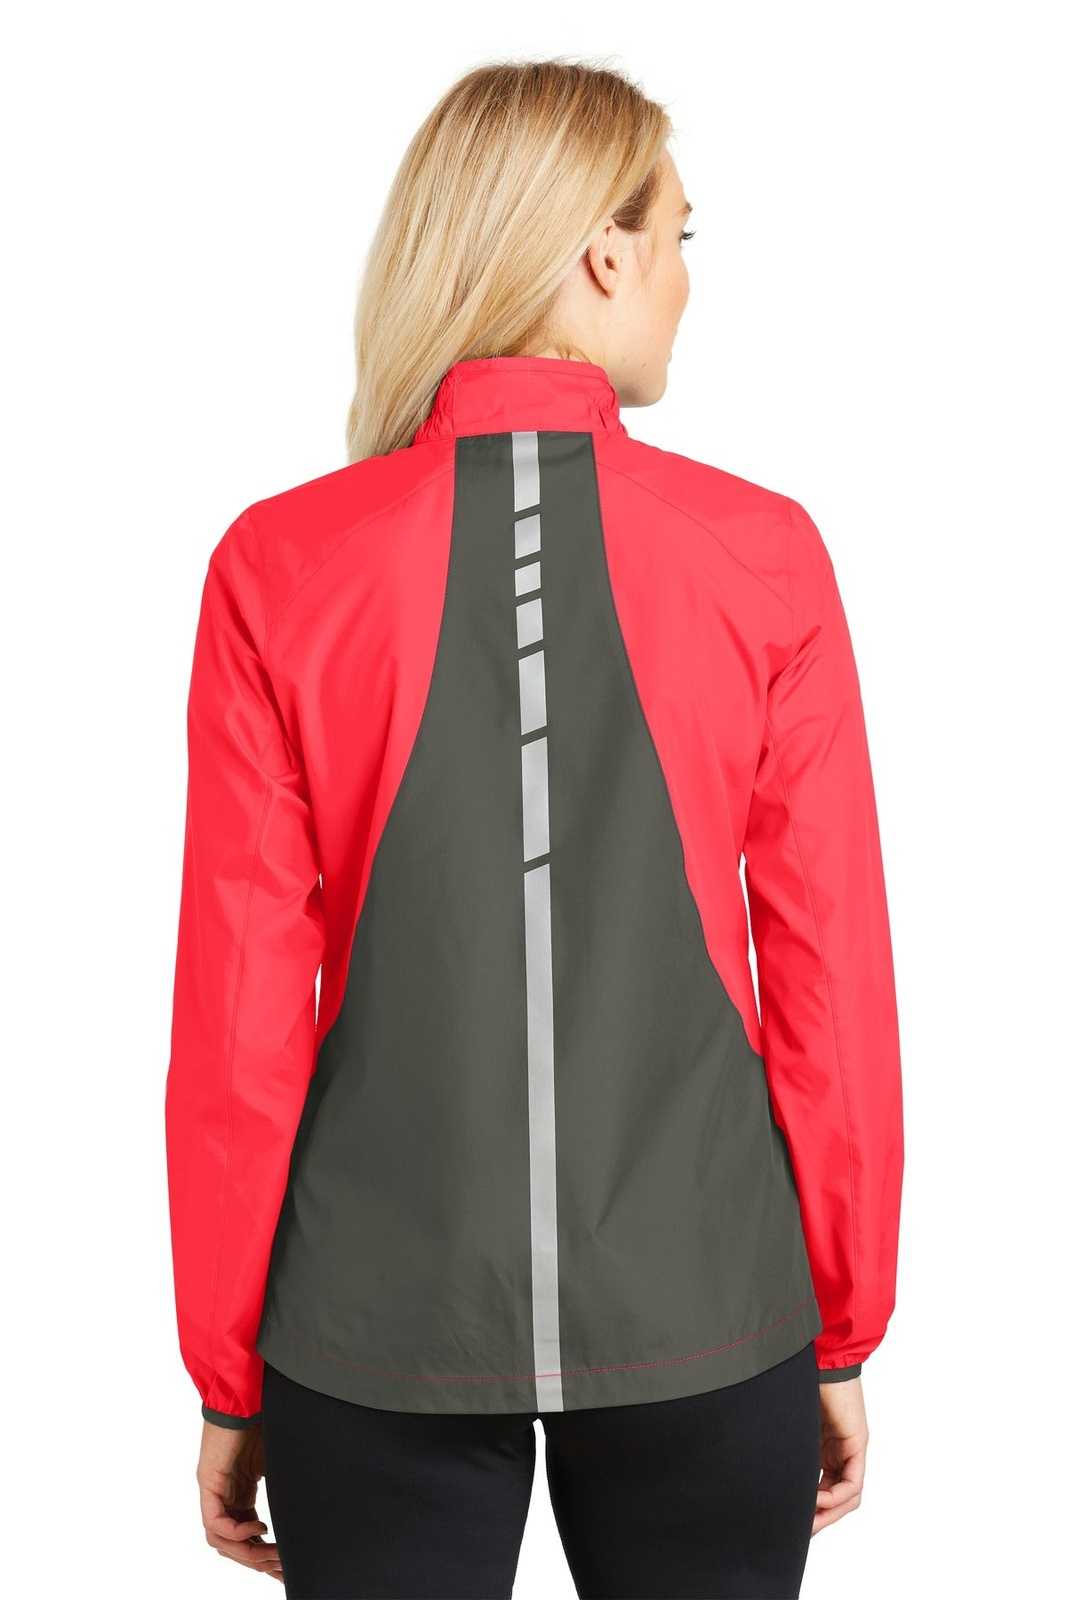 Port Authority L345 Ladies Zephyr Reflective Hit Full-Zip Jacket - Hot Coral Gray Steel - HIT a Double - 2